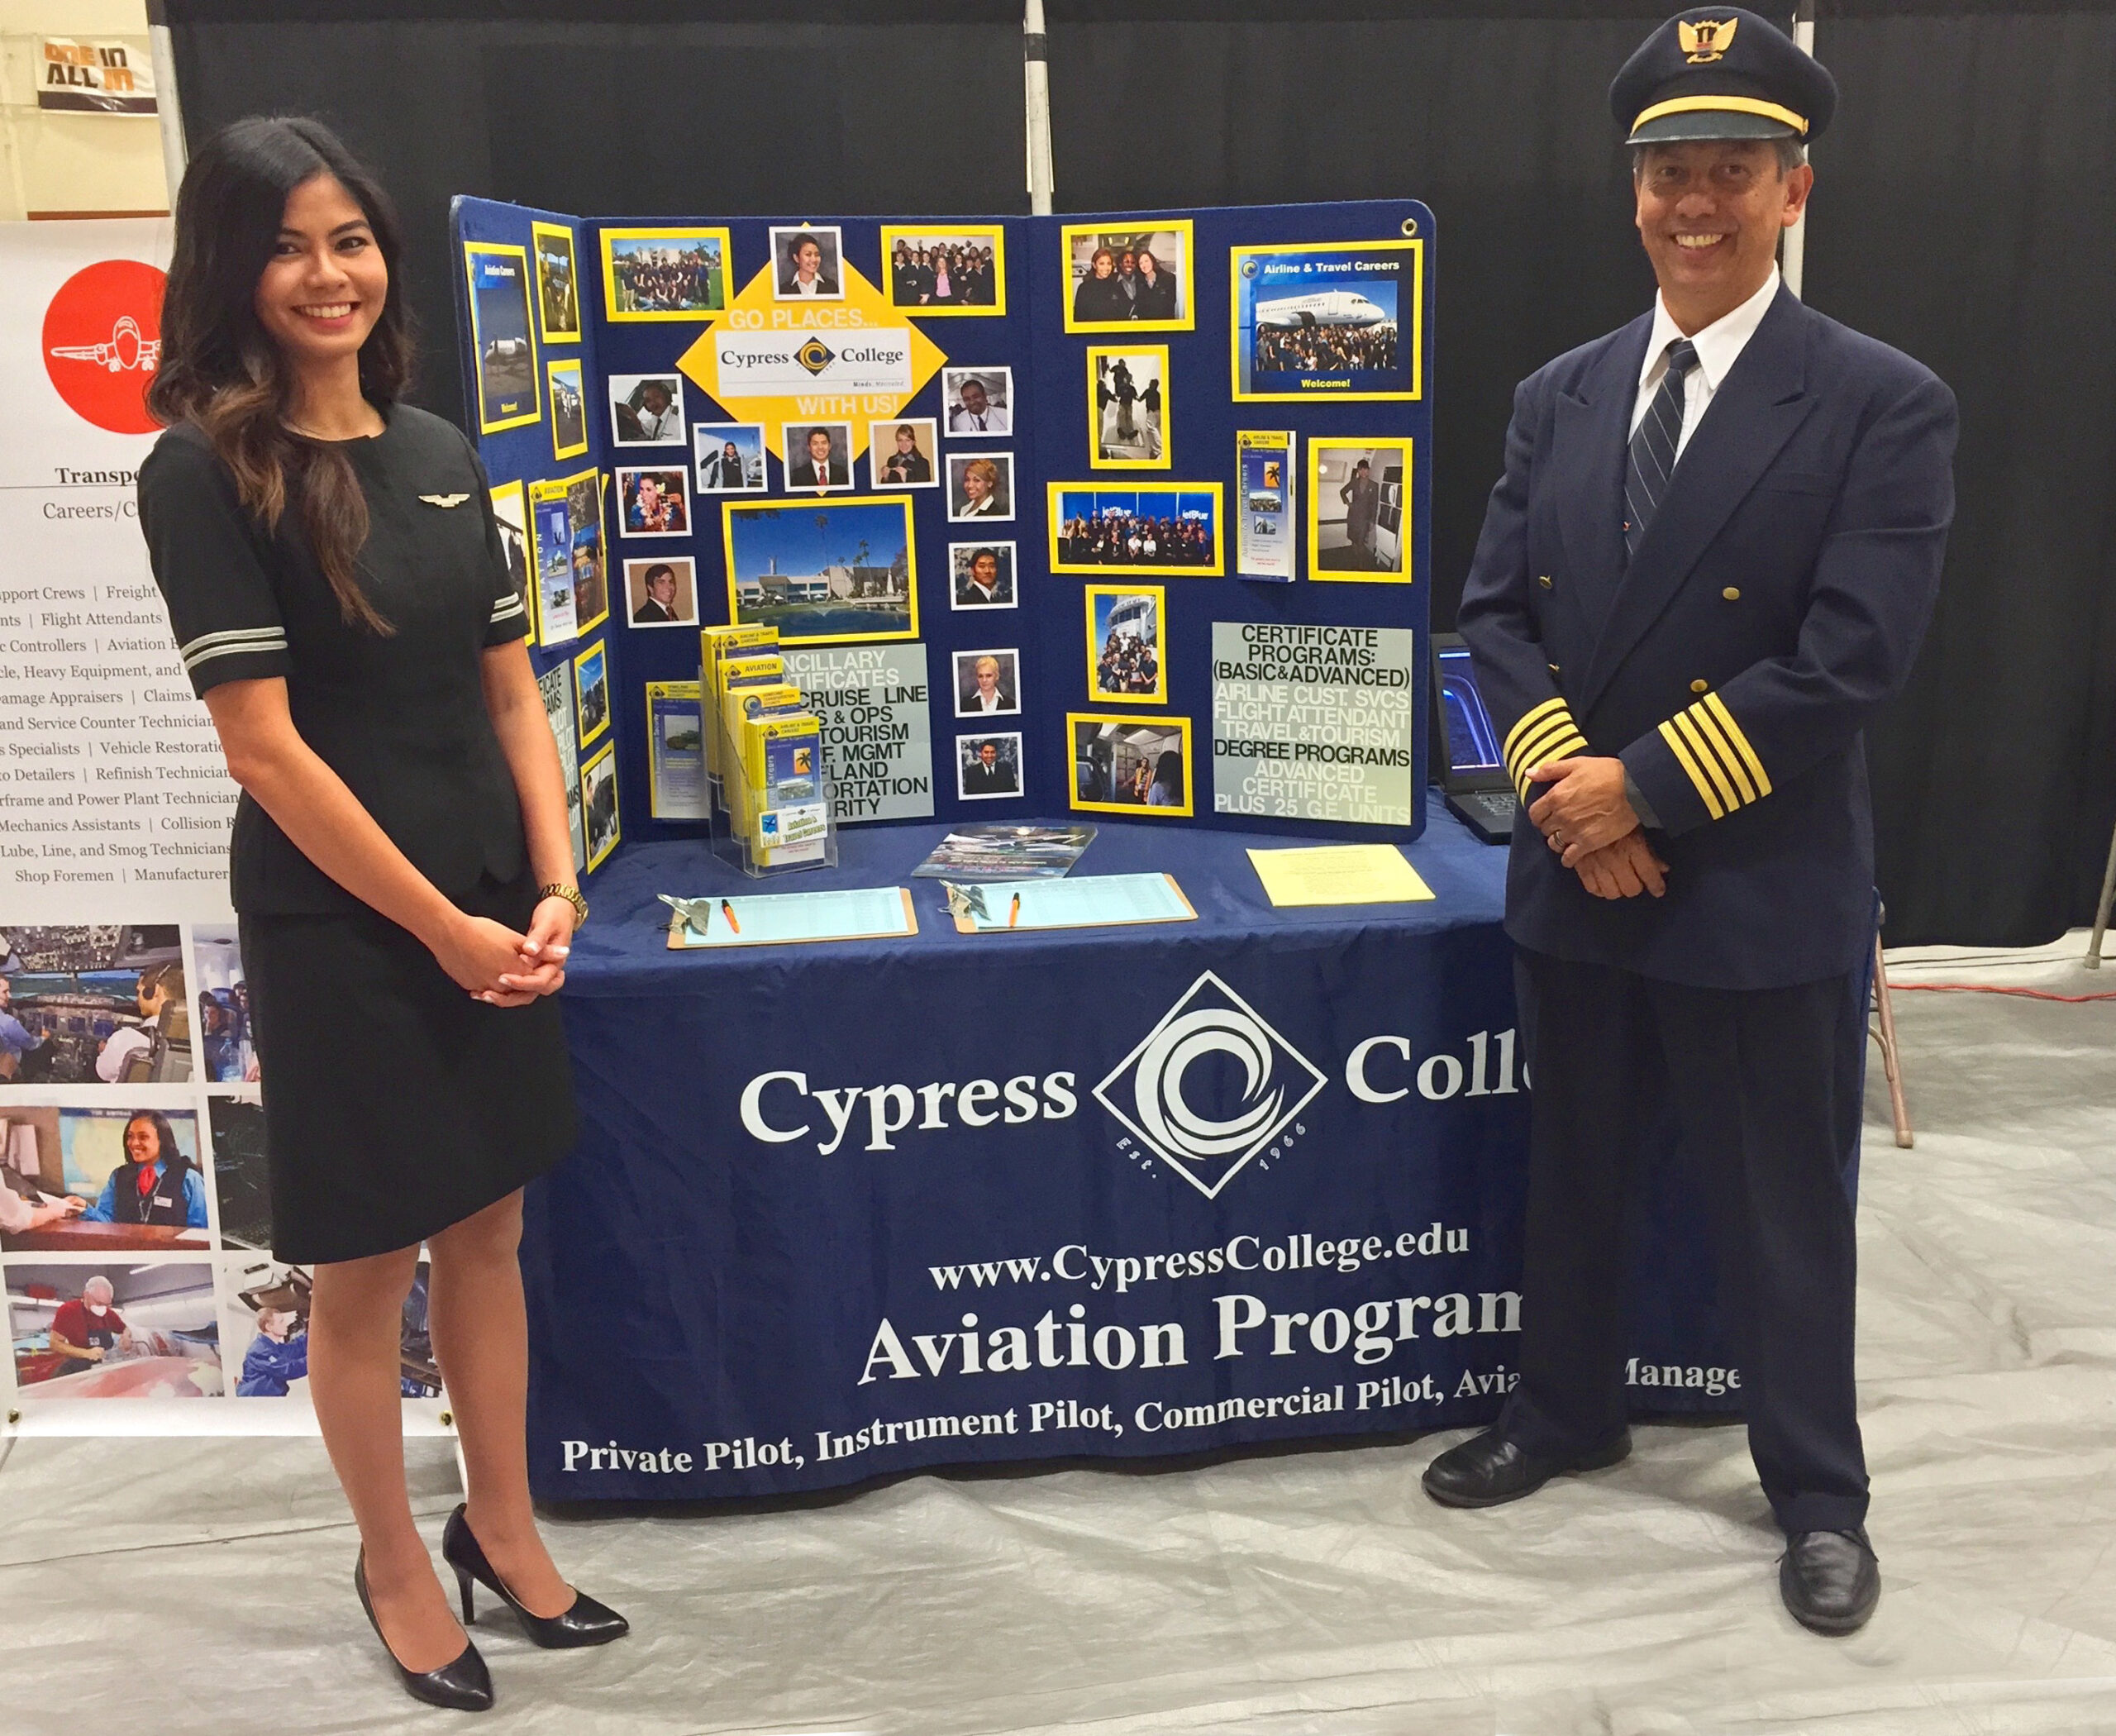 A flight attendant and pilot in navy blue uniforms stand before a table with handouts on information for studying and getting jobs in the aviation field.